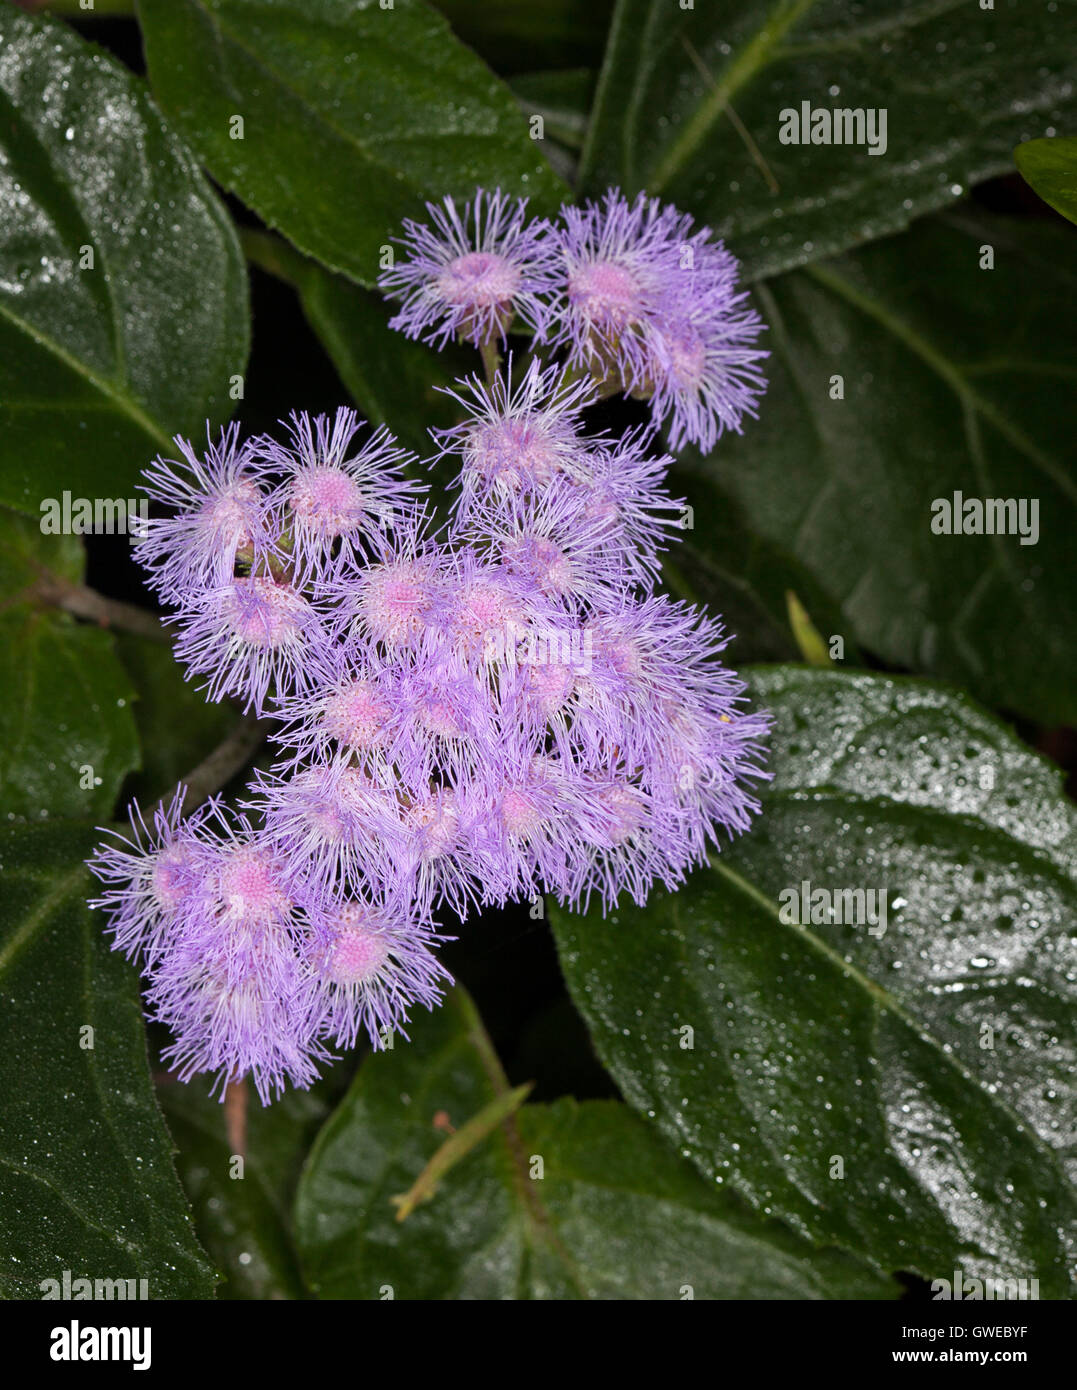 Large cluster of fluffy mauve flowers & dk leaves of Bartlettina sordida nana syn Eupatorium, Mexican mist / purple torch flower Stock Photo